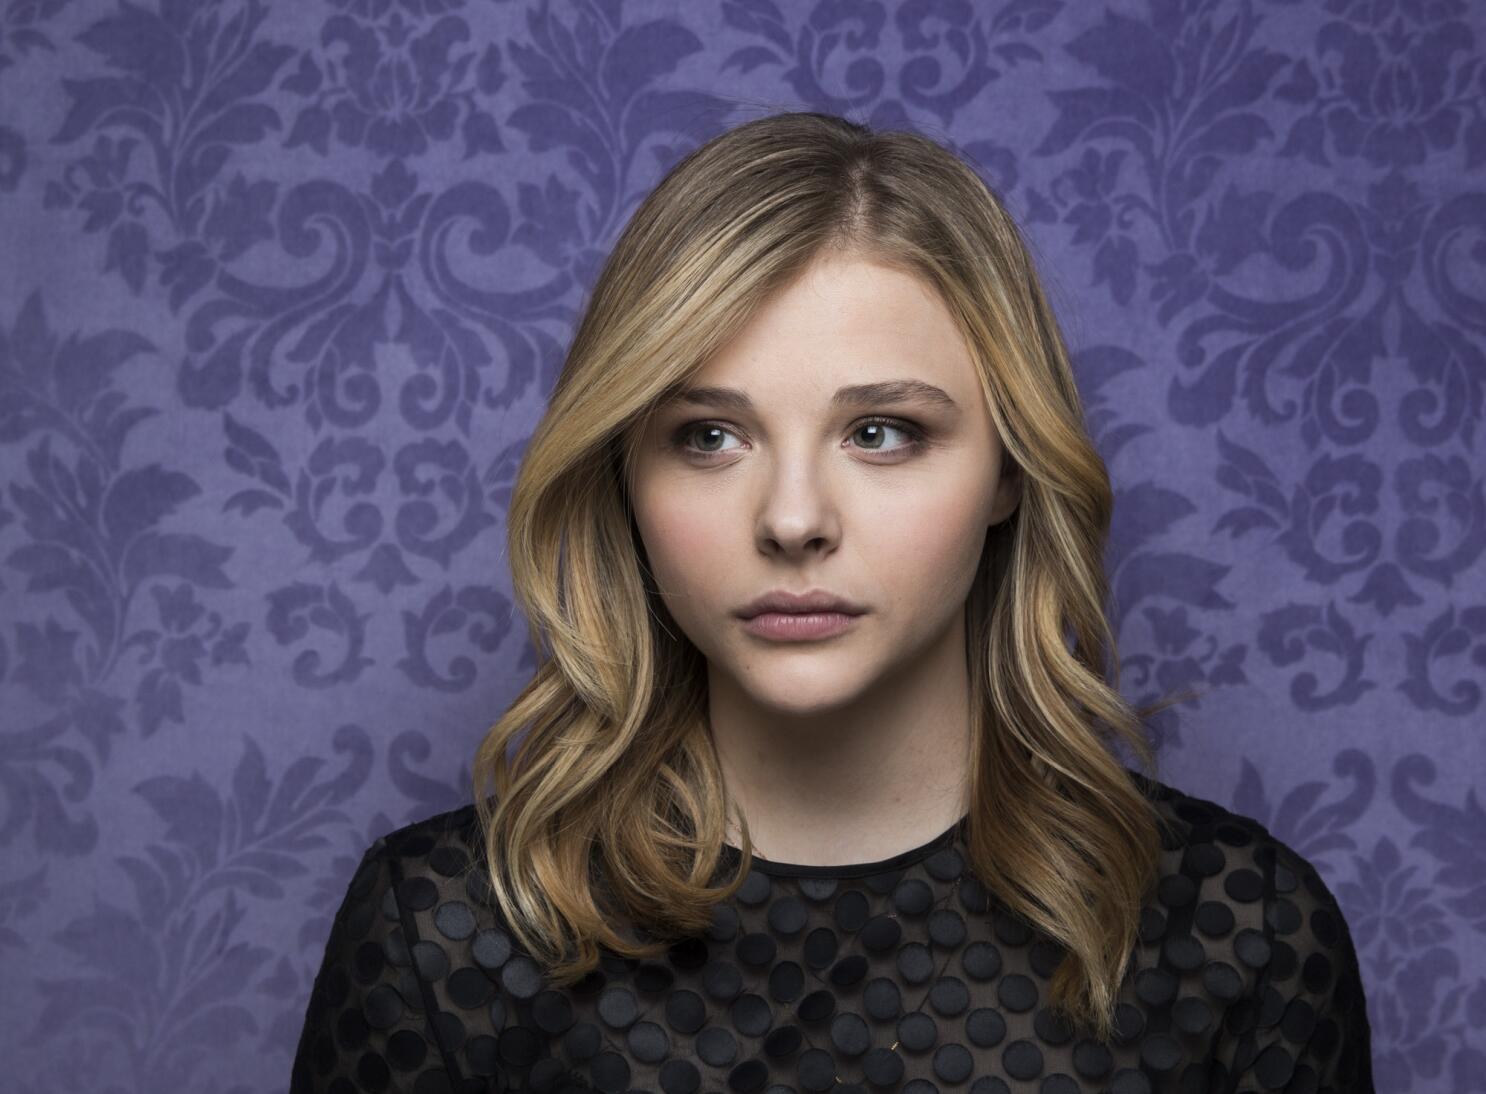 Chloe Grace Moretz catches a flight with her mom at Los Angeles